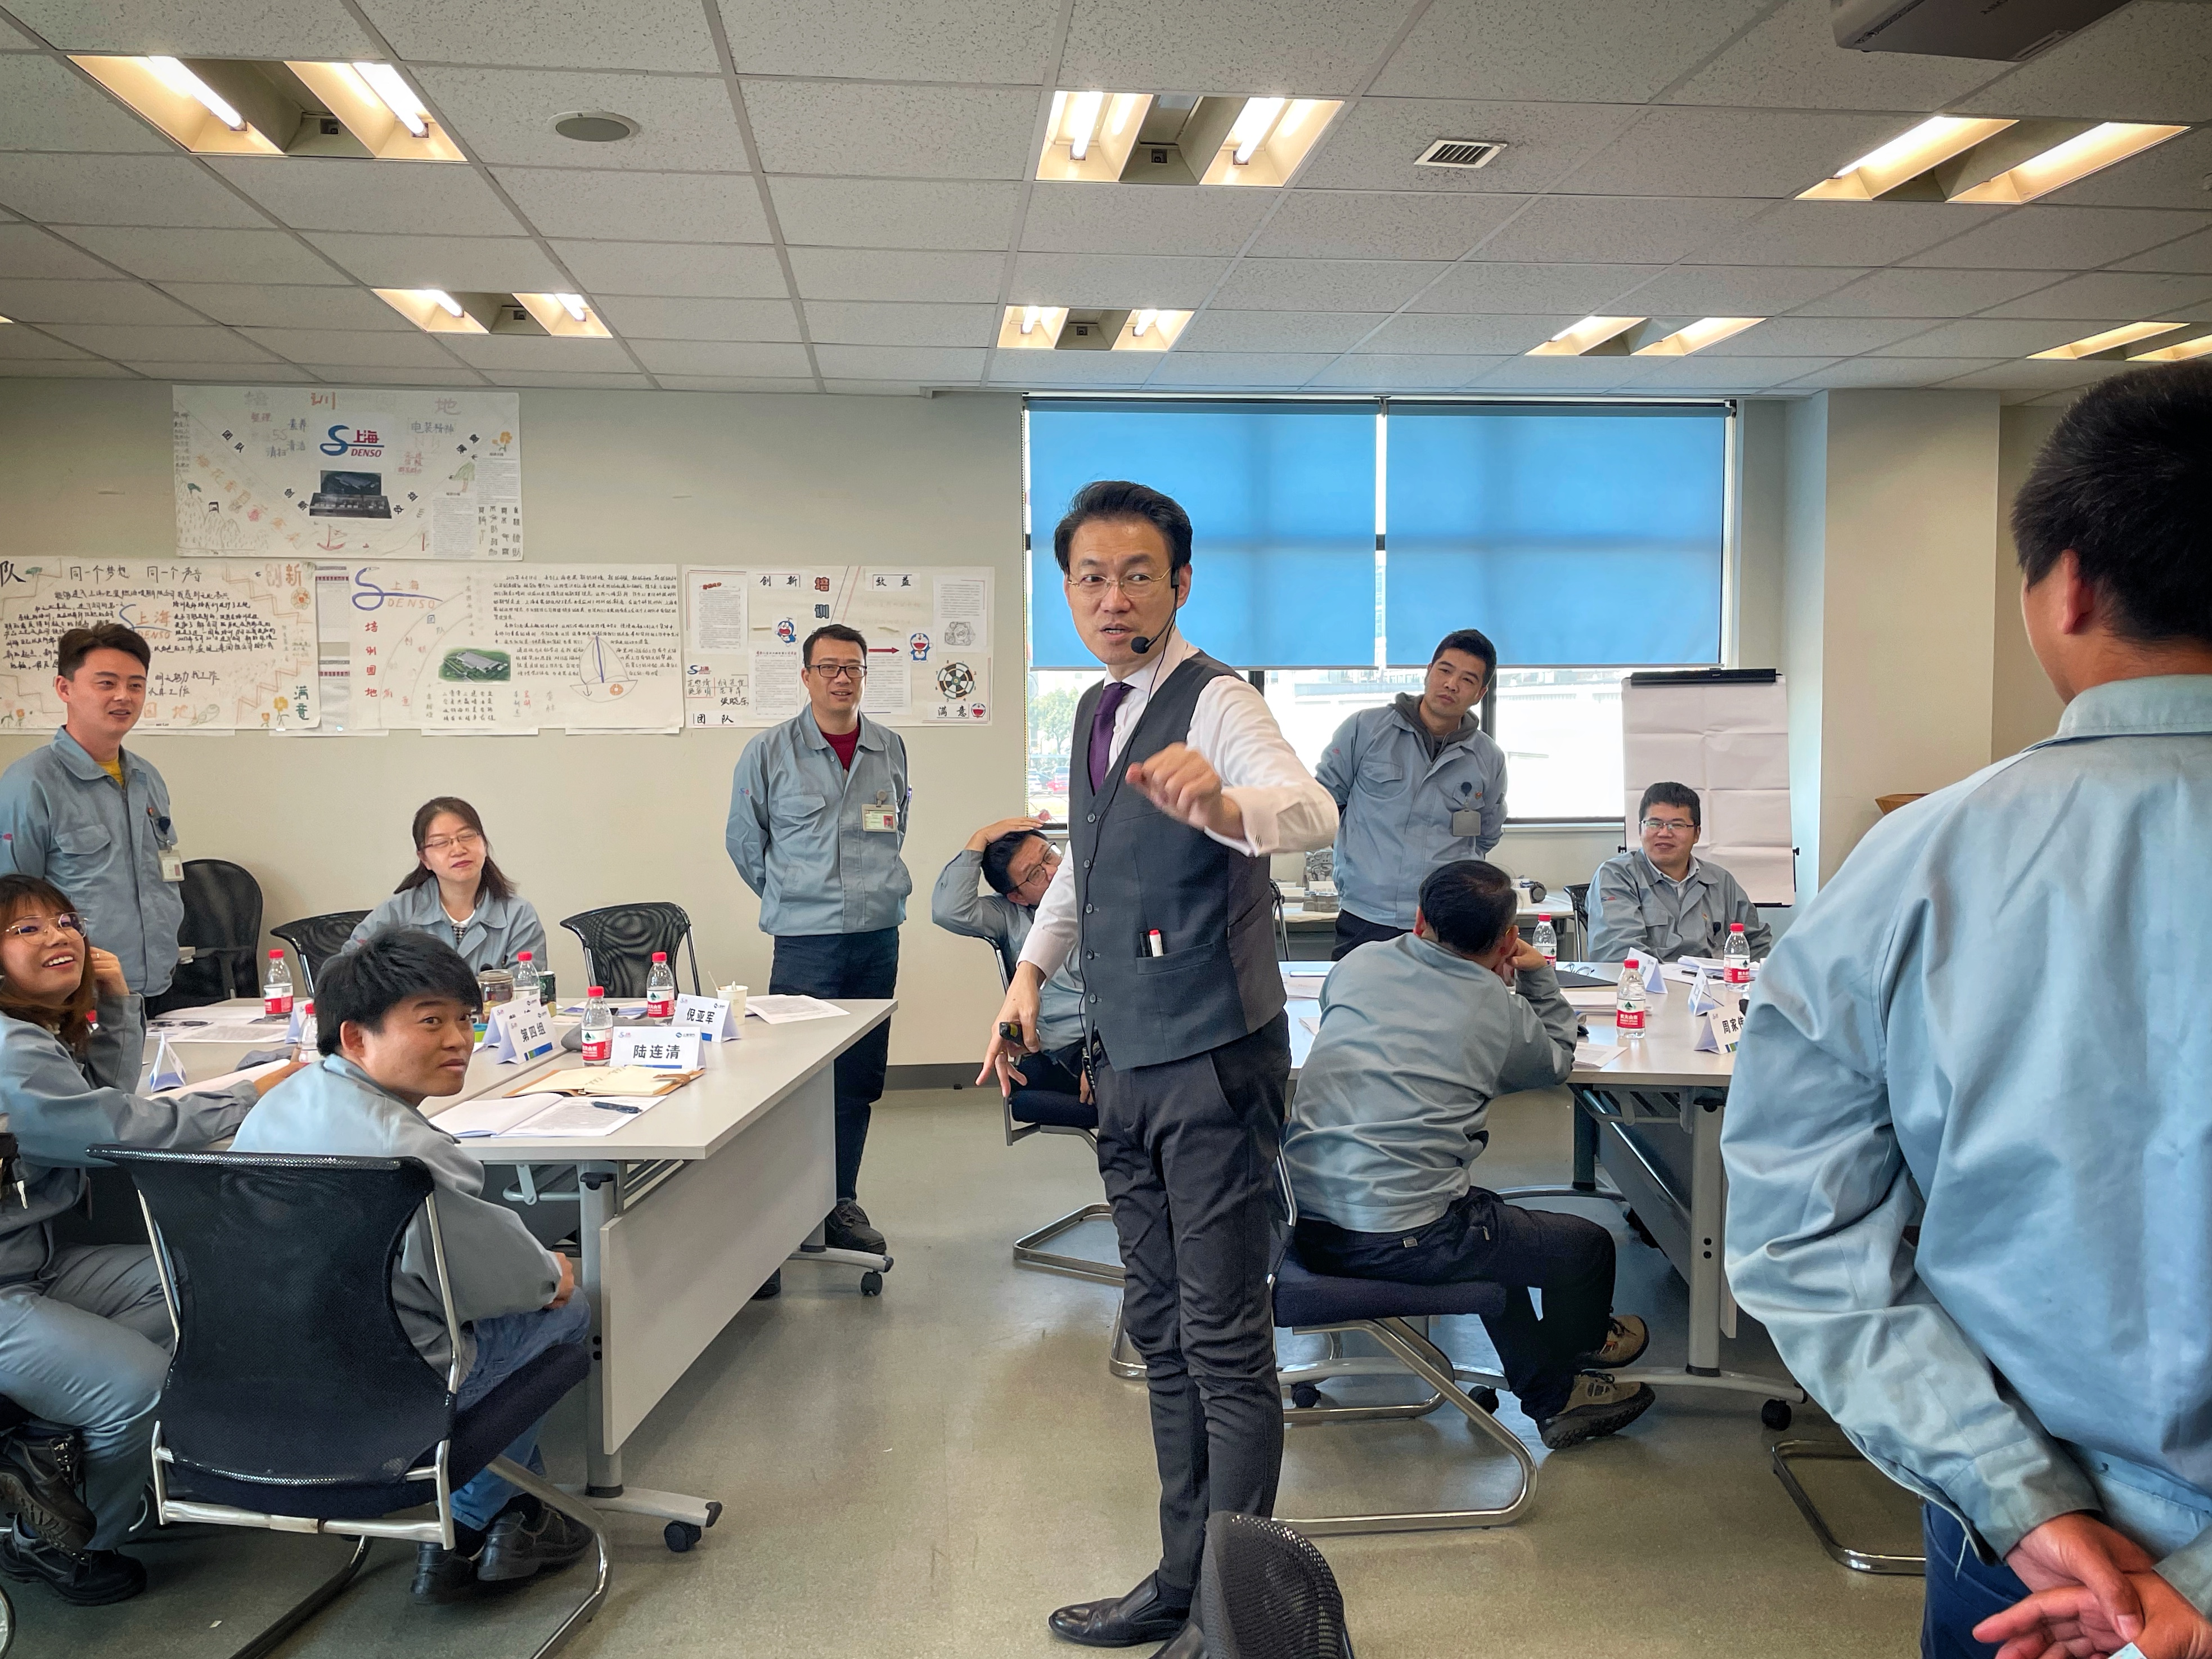 Shanghai Denso organizes special training for key personnel to help them master effective incentive methods